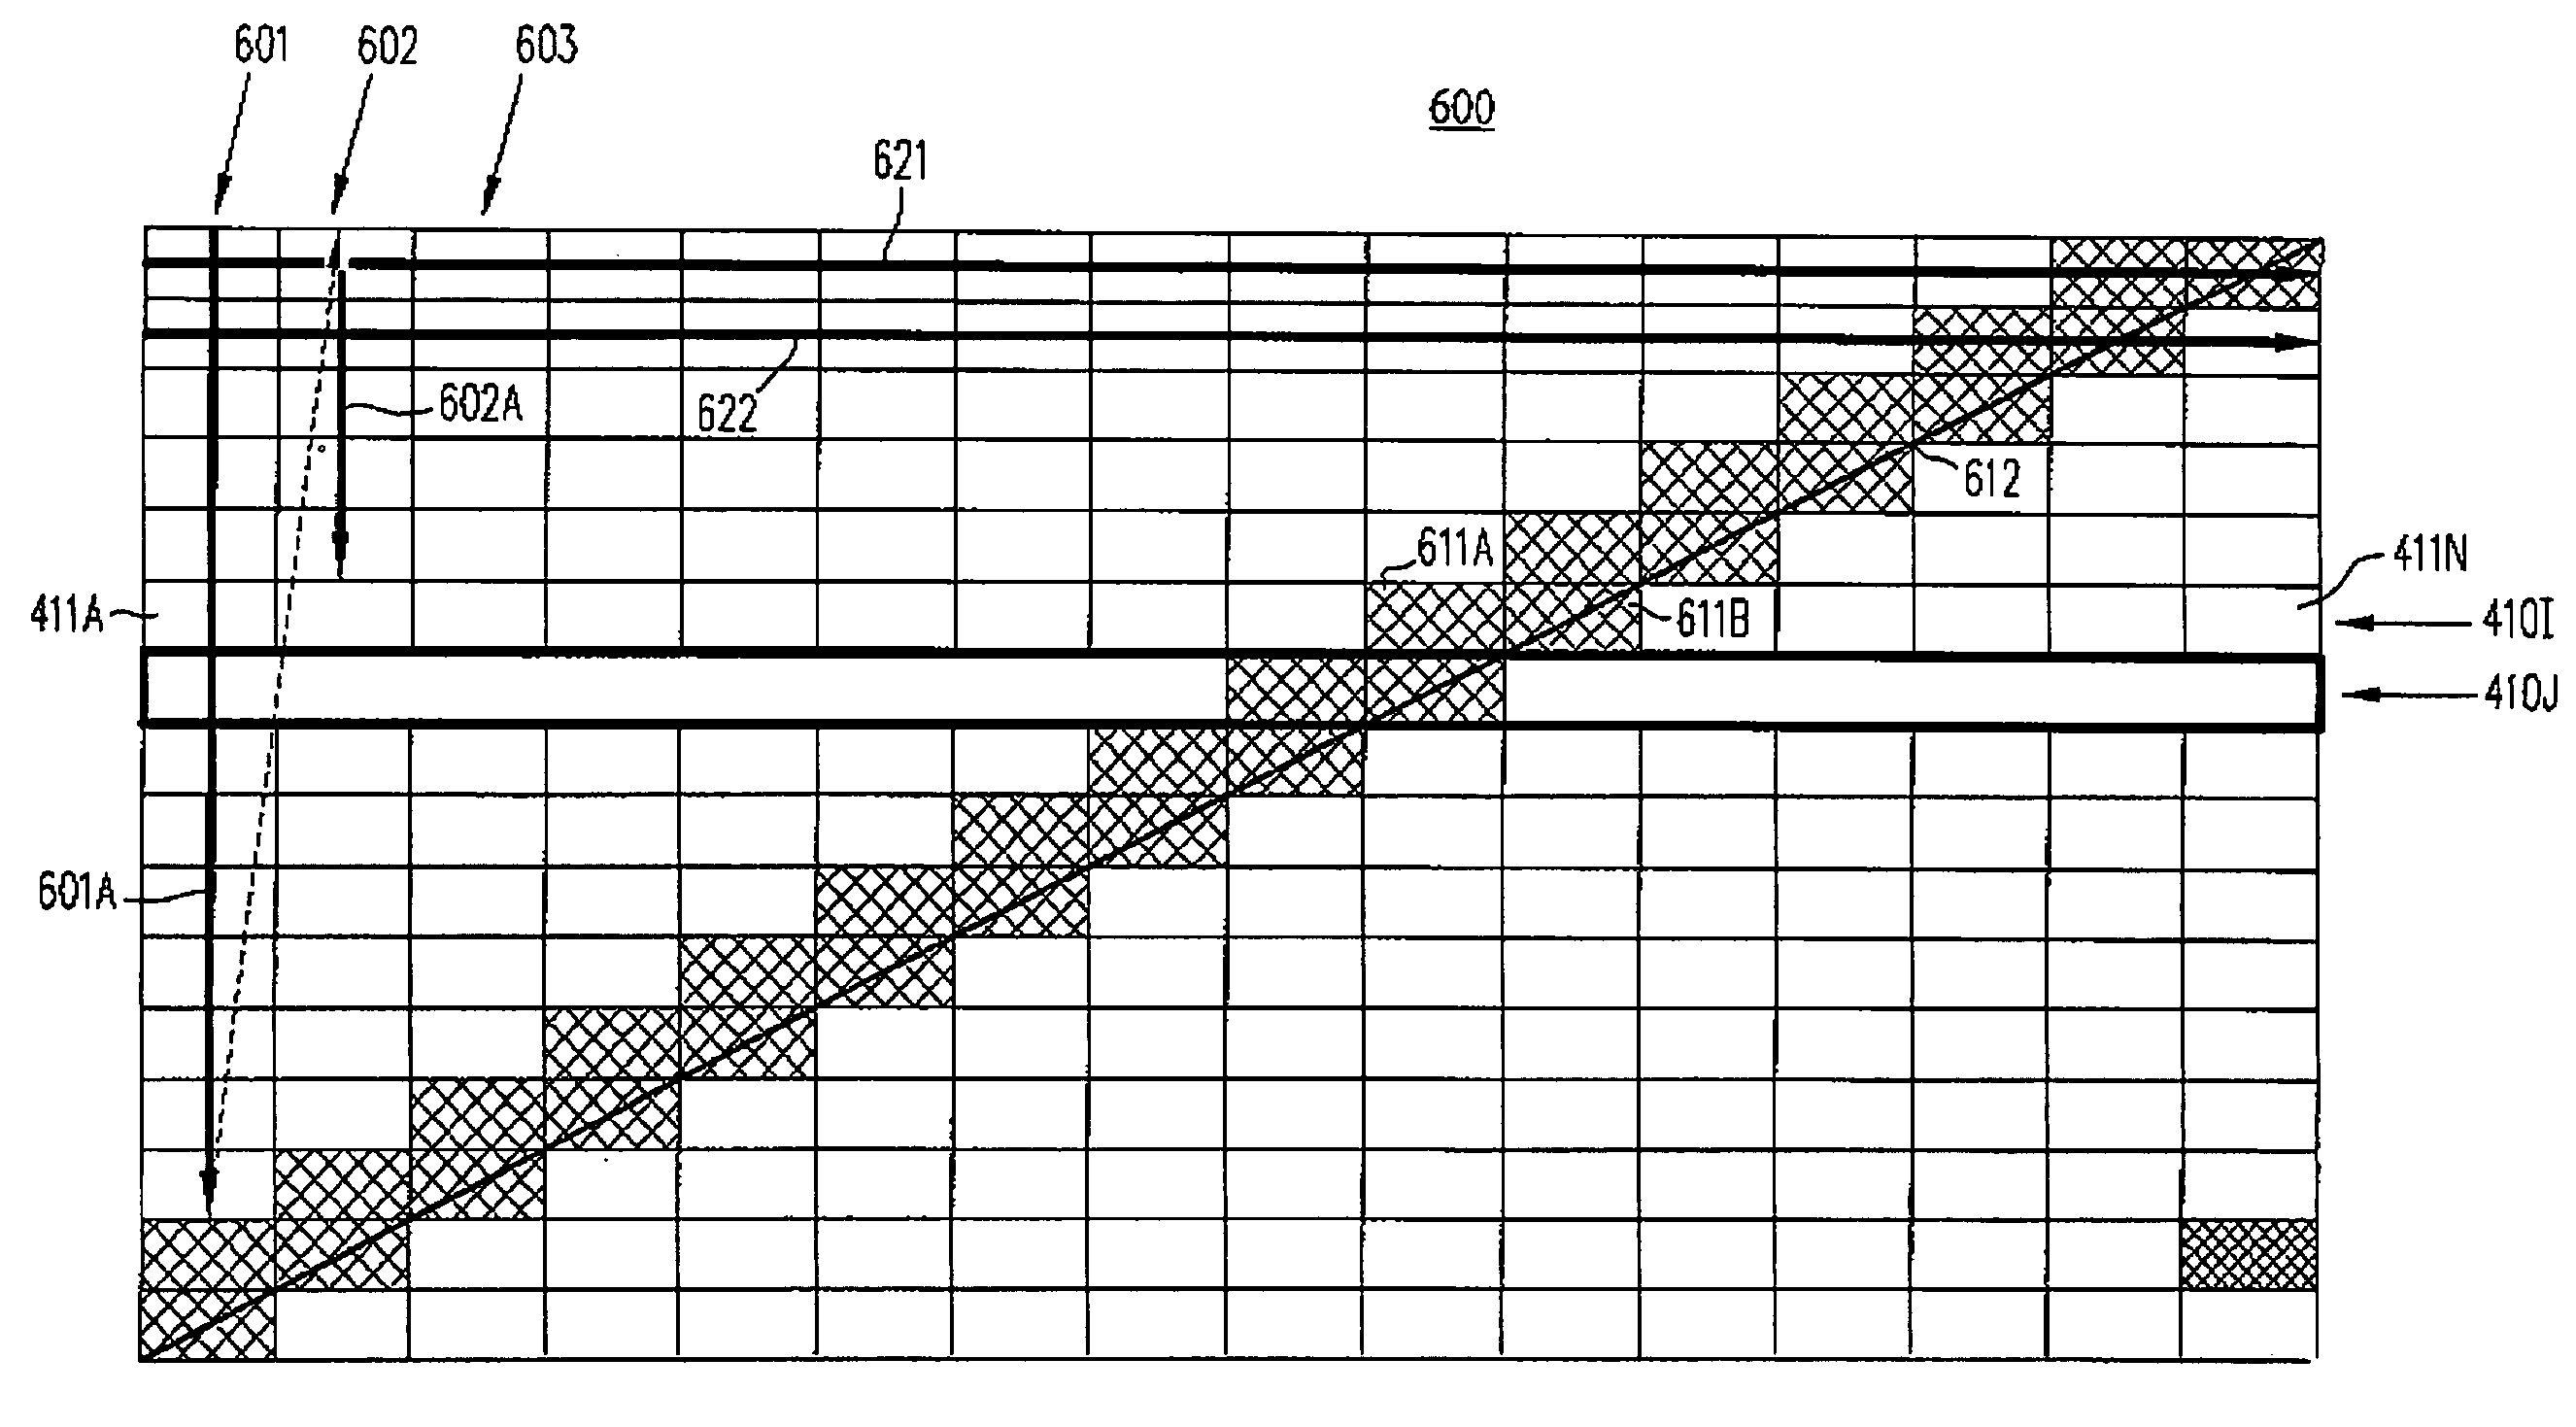 Allocation of upstream bandwidth in an ethernet passive optical network